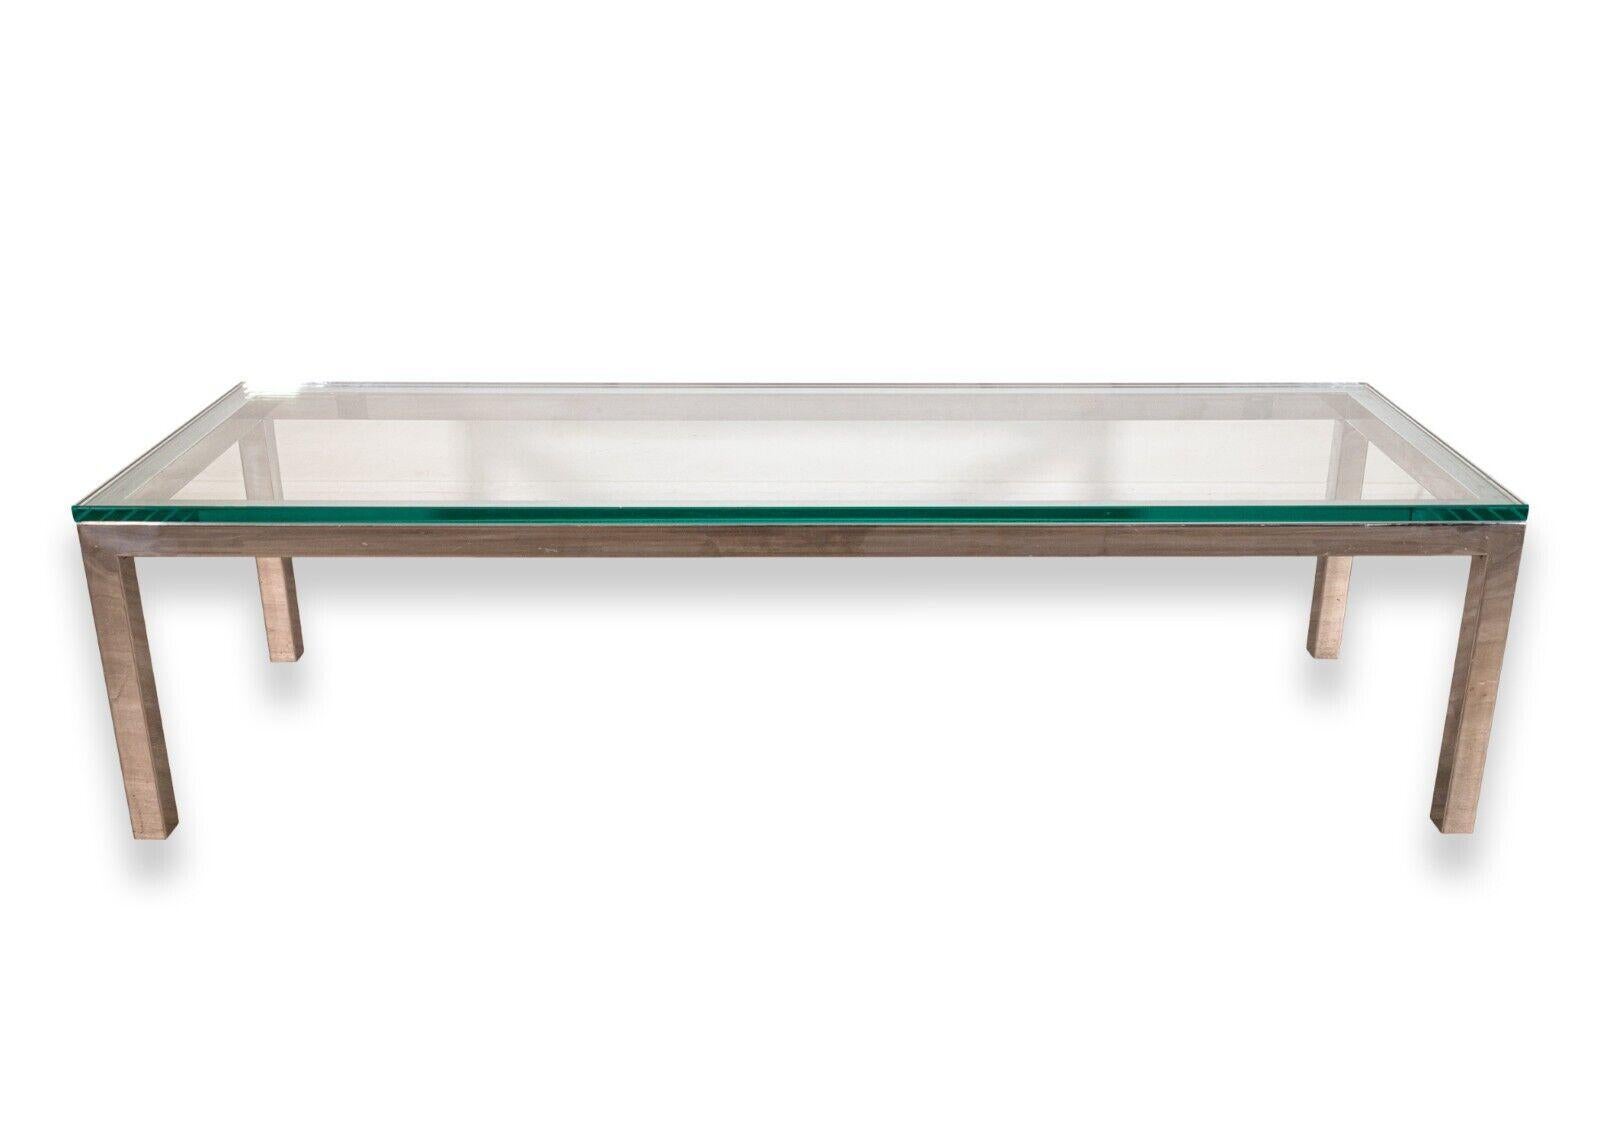 A Milo Baughman contemporary modern rectangular chrome and glass coffee table. A beautiful coffee table featuring a sleek, rectangular chrome frame, and a matching thick glass table top. This piece is in very good condition. It measures 16 in tall,